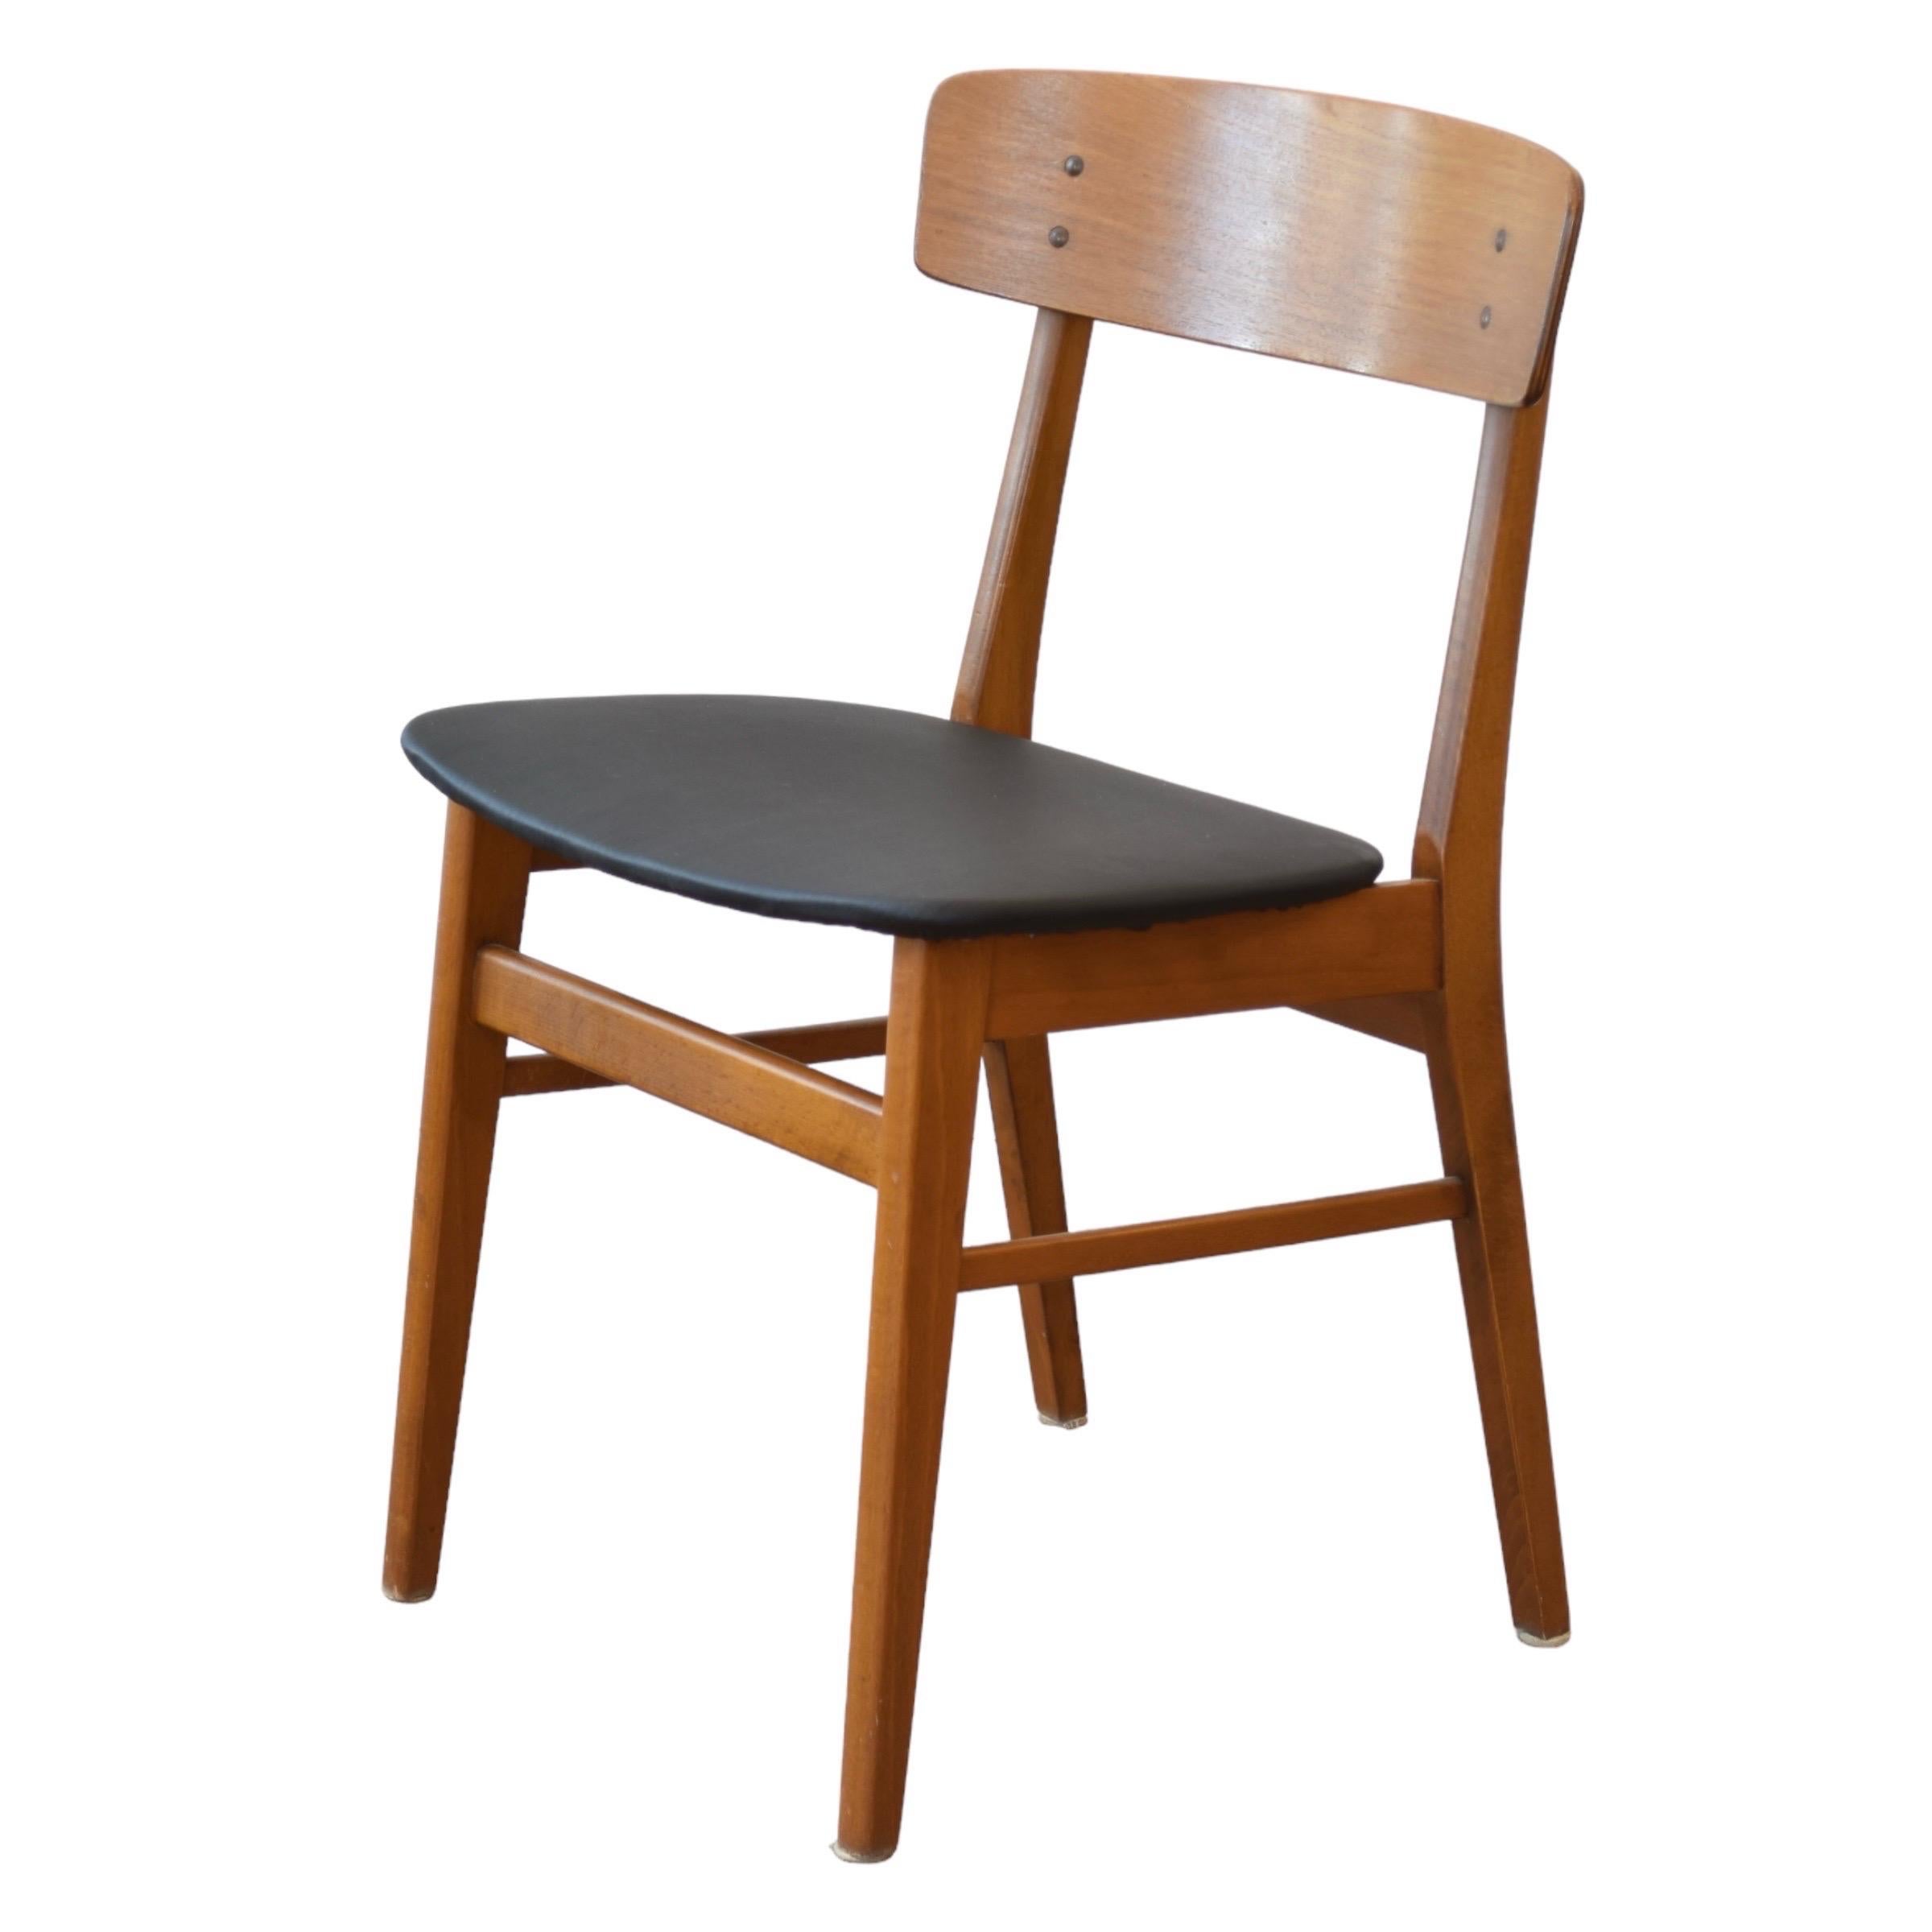 Condition: Great Vintage Condition - Freshly Reupholstered

Dimensions: 18.5” L x 19” D x 30.5” H (17.75” SH)

Description: A vintage set of 6 teak & beech dining chairs by Farstrup. Made in Denmark, circa 1960s. Freshly reupholstered in black